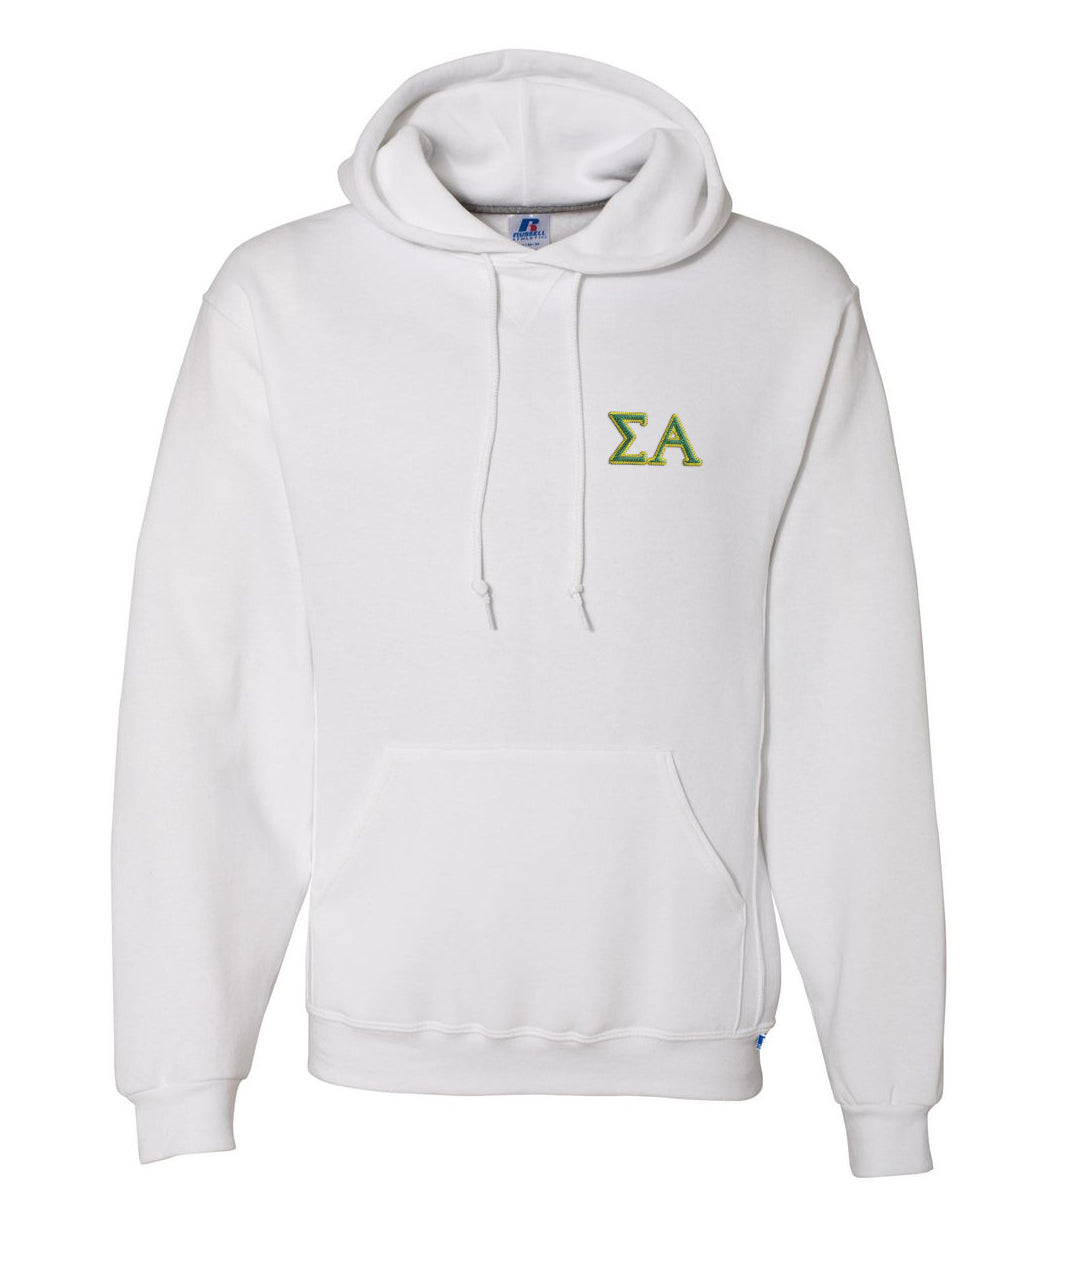 Sigma Alpha Embroidered Hoodie